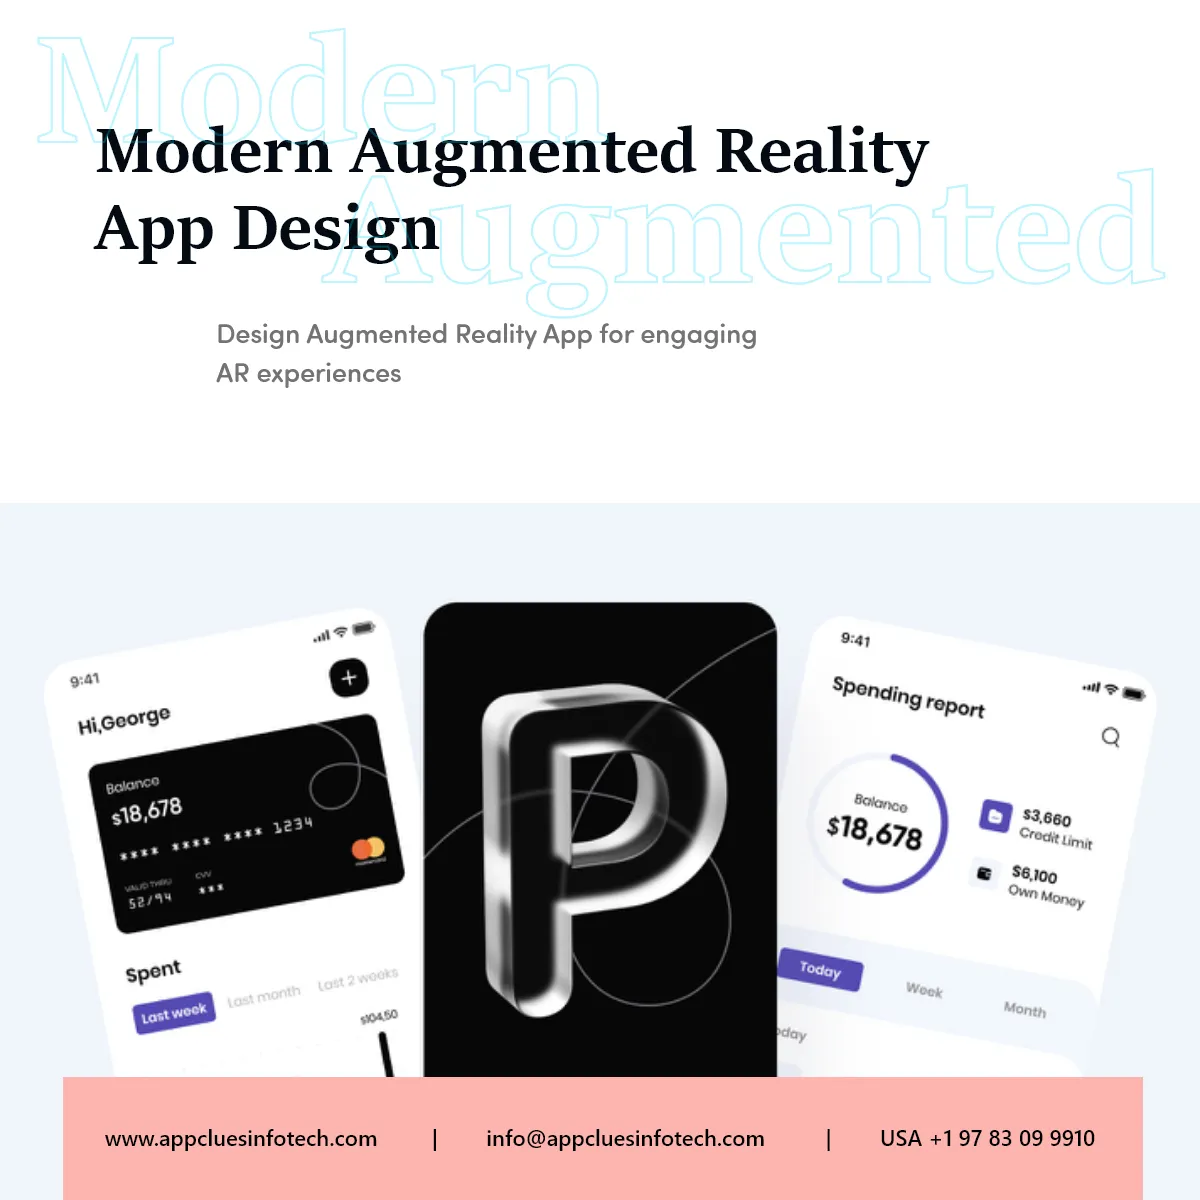 Top-Notch Augmented Reality App Design & Development Company in USA